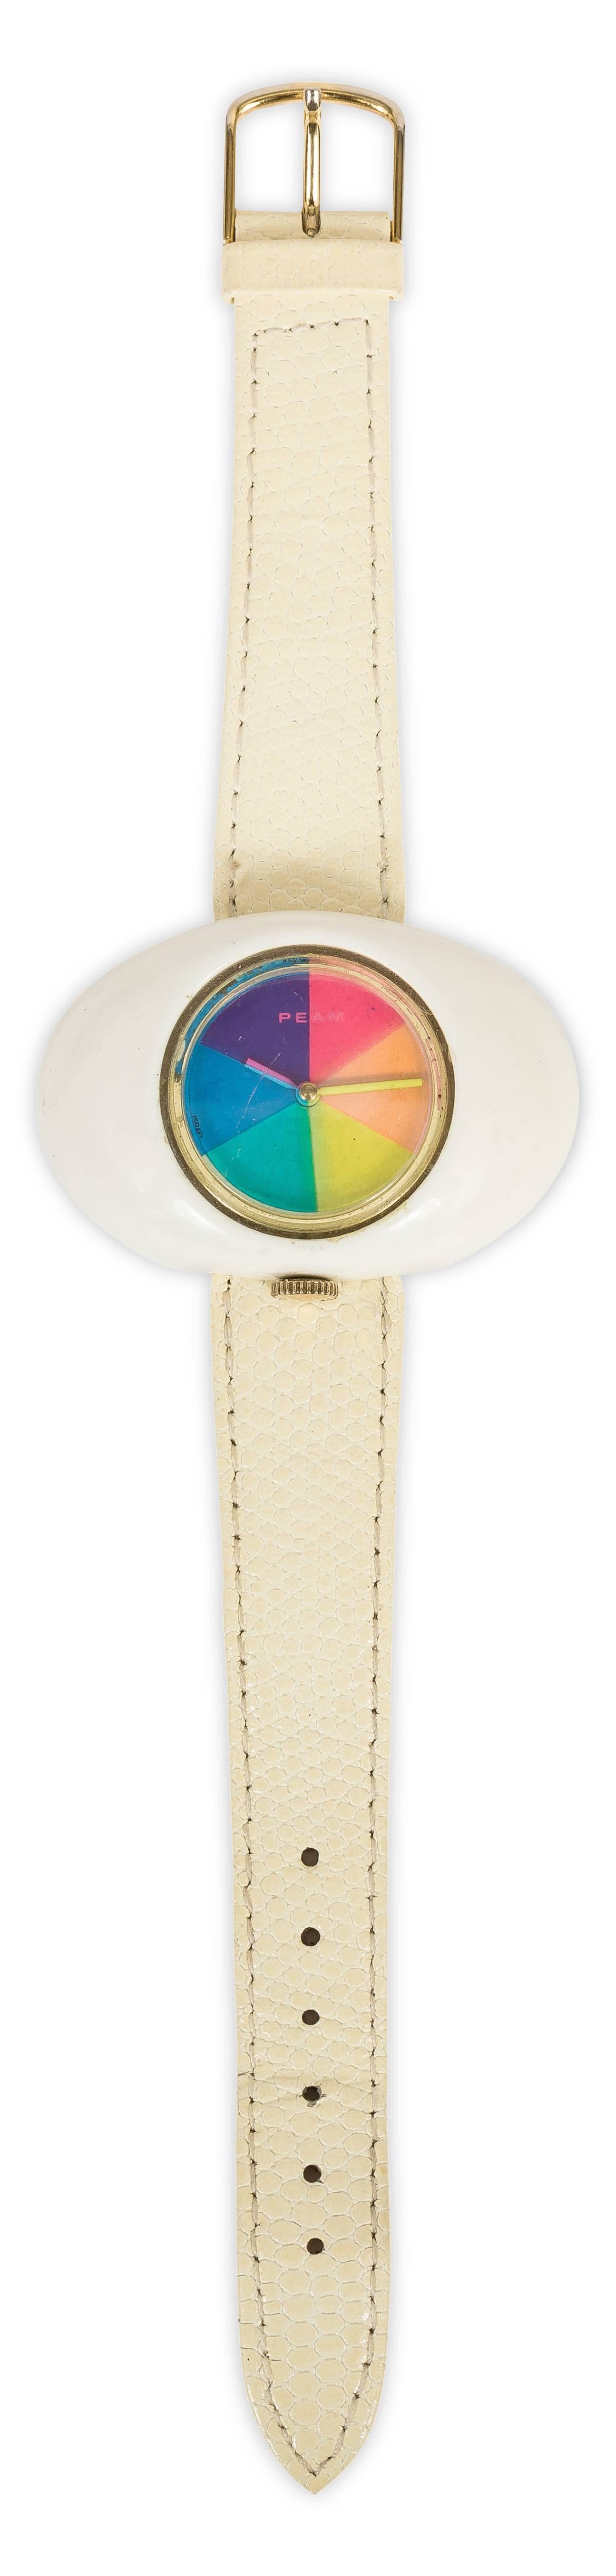 Vintage 1970's French Peam psychedelic oval-shaped watch with rainbow face and dial. Comes with pebbled leather watch band. In working condition - windup dial. In excellent condition with one light, small scratch to watch face.
MEASUREMENTS:
Watch